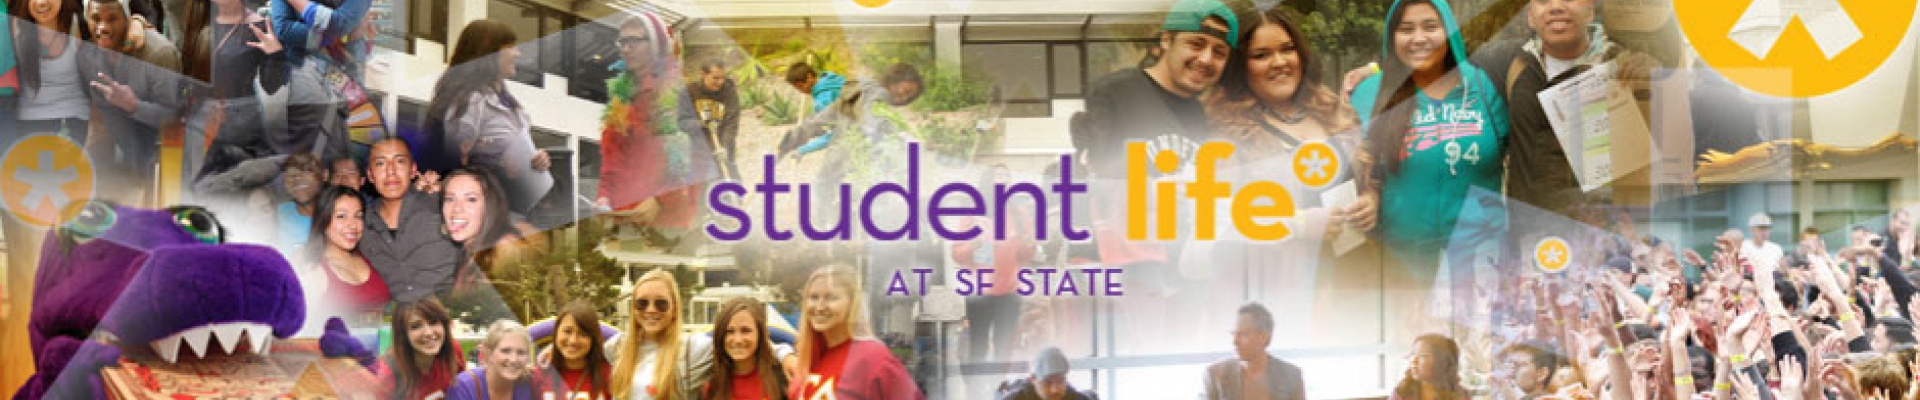 Student Life logo surrounded by images of people